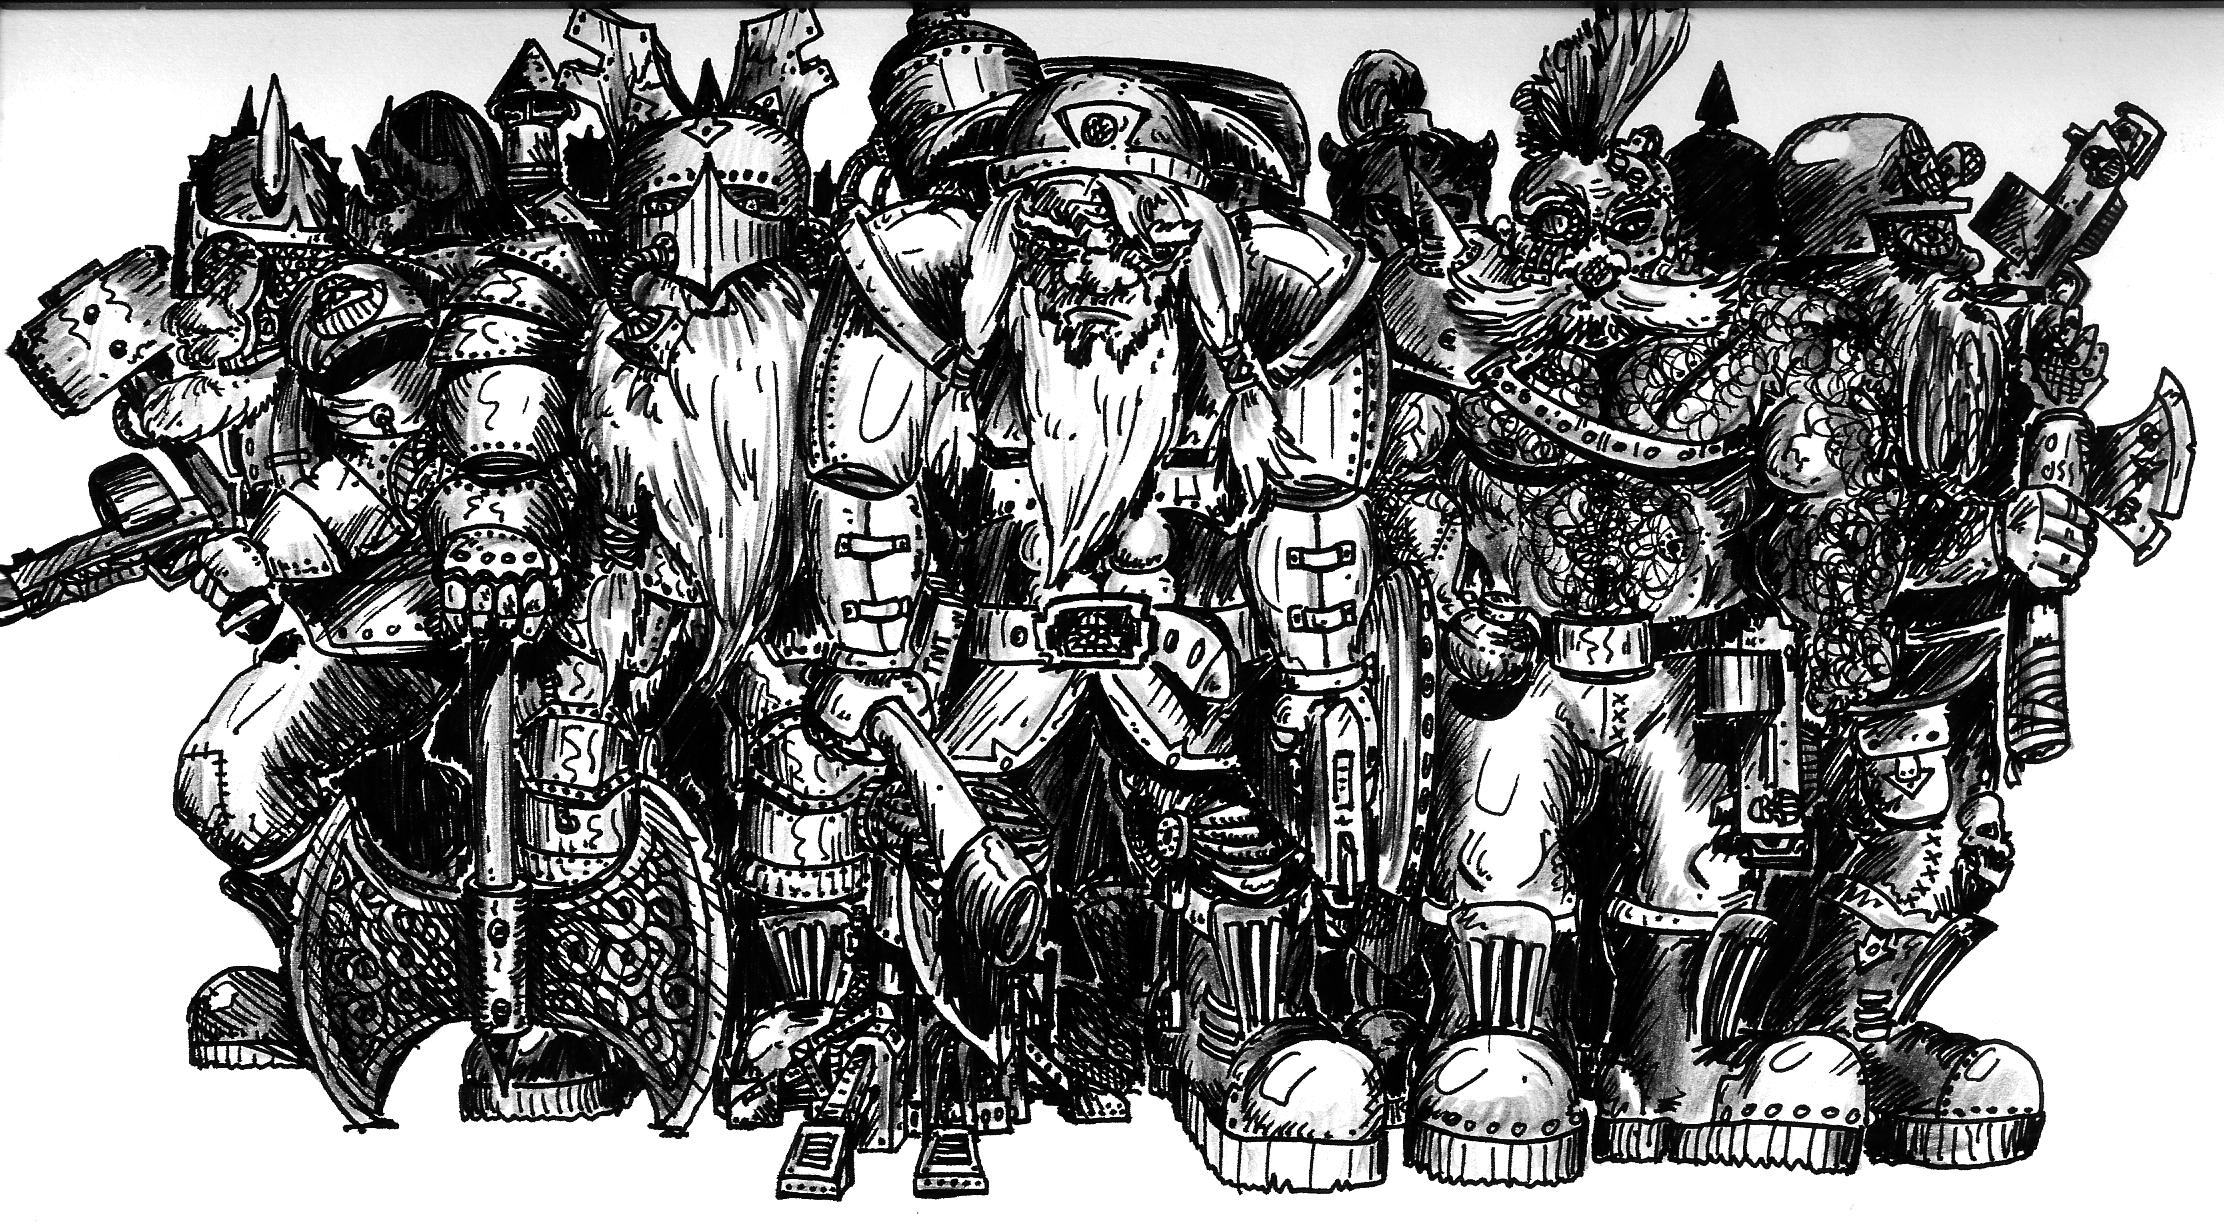 Army, Artwork, Big, Bike, Codex, Conversion, Crazy, Dwarves, Exo, Exosuits, Imperial, Old, Oldhammer, Rogue, School, Scratch, Scratch Build, Squad, Squats, Suit, Trader, Ugly, Votann, Warhammer Fantasy, White, Witchhunter